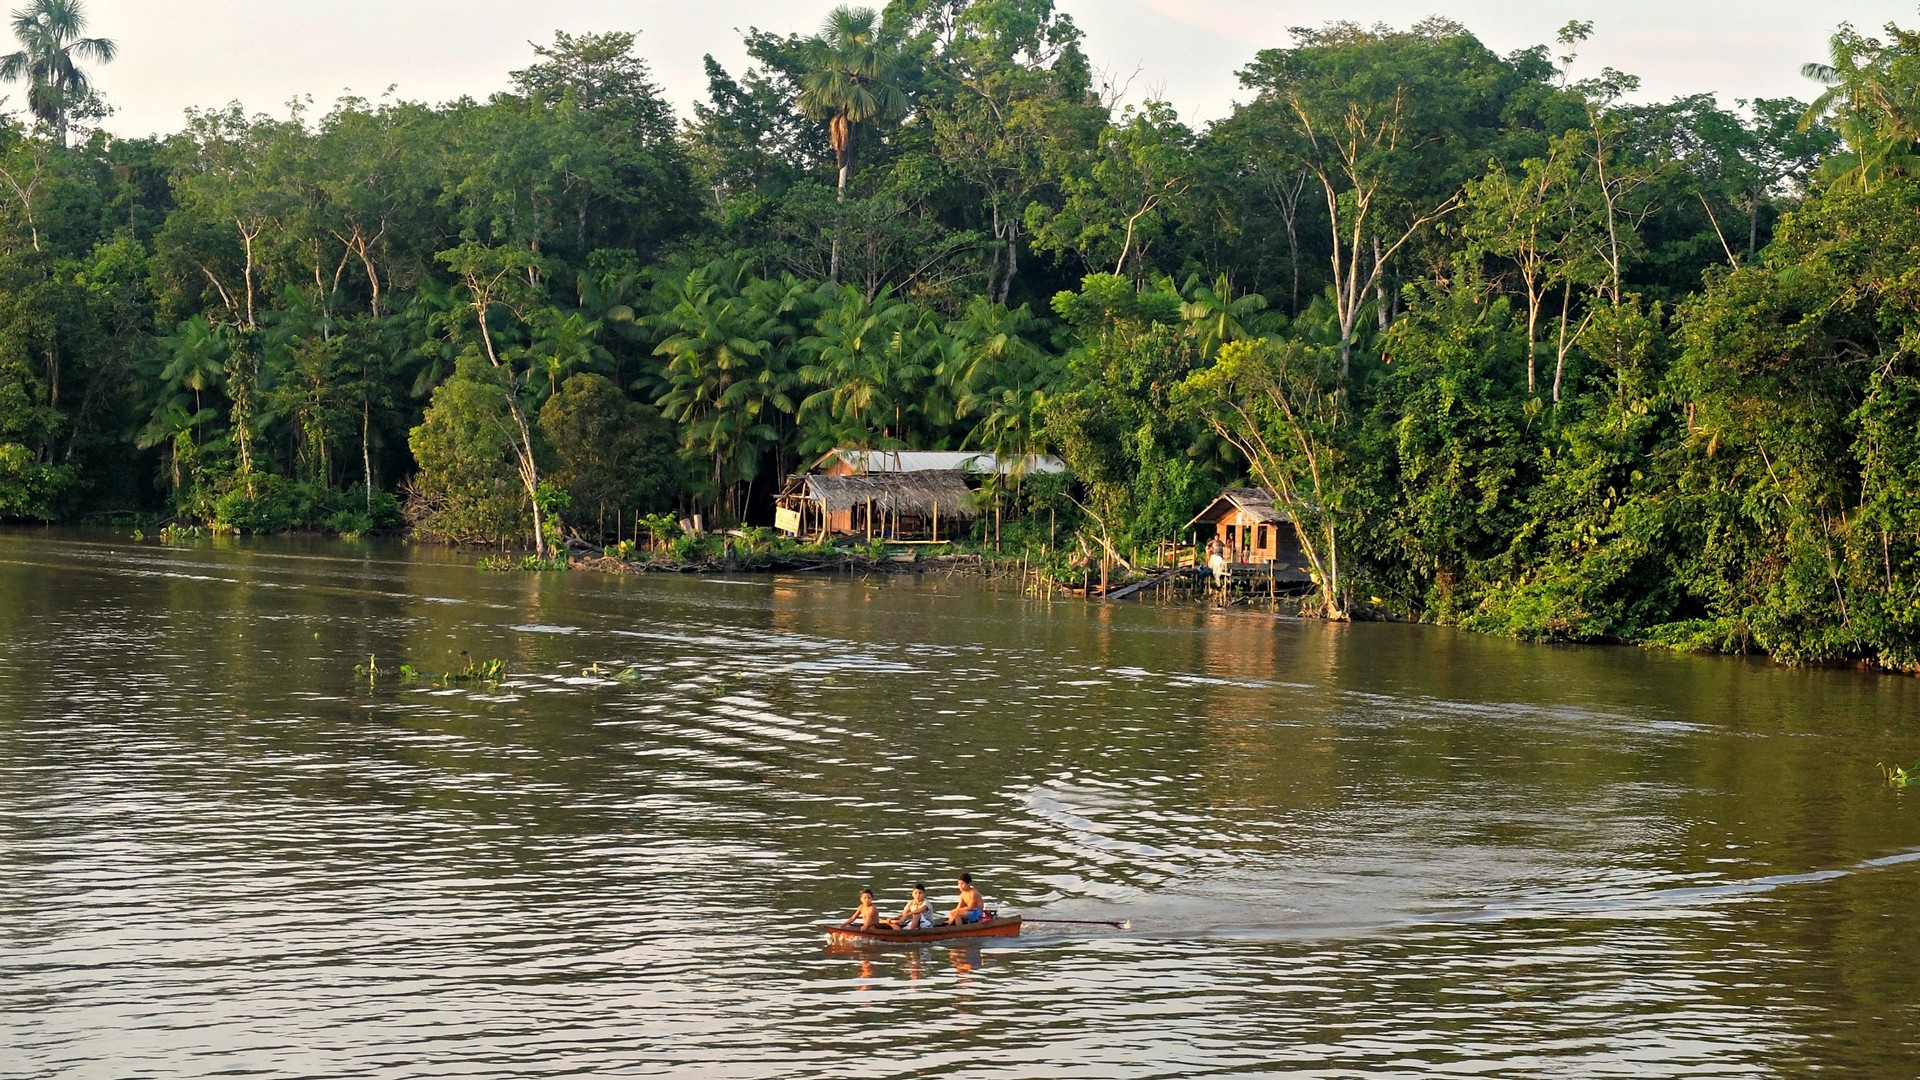 Habitations en Amazonie (photo Flickr: 
We travel the world CC BY-NC-ND 2.0)
